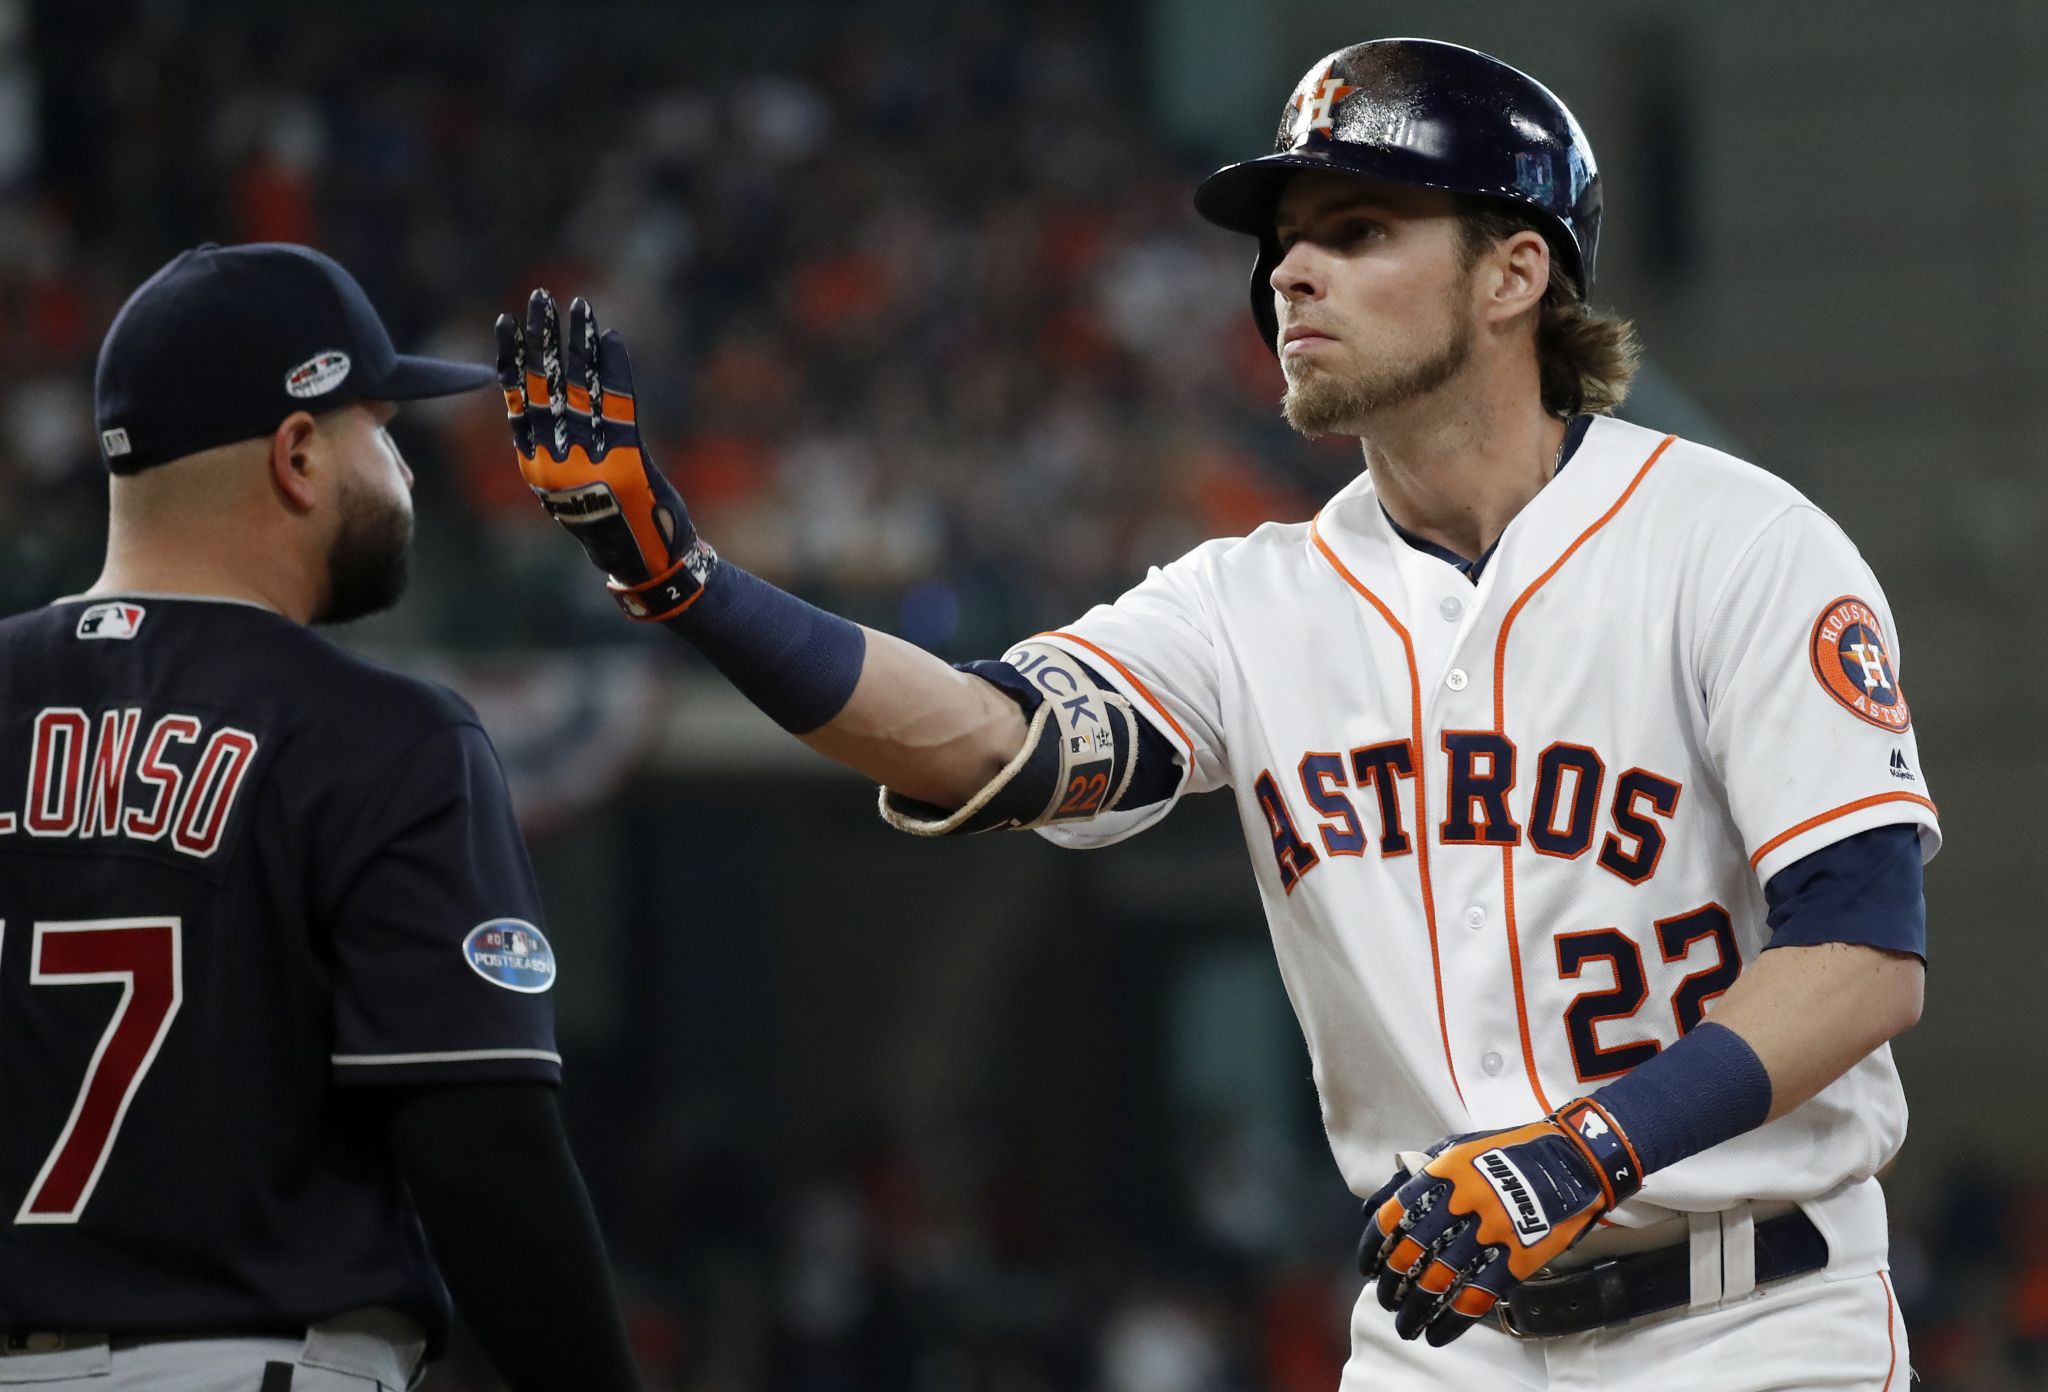 Acknowledging 'things can change,' Josh Reddick hopes to remain